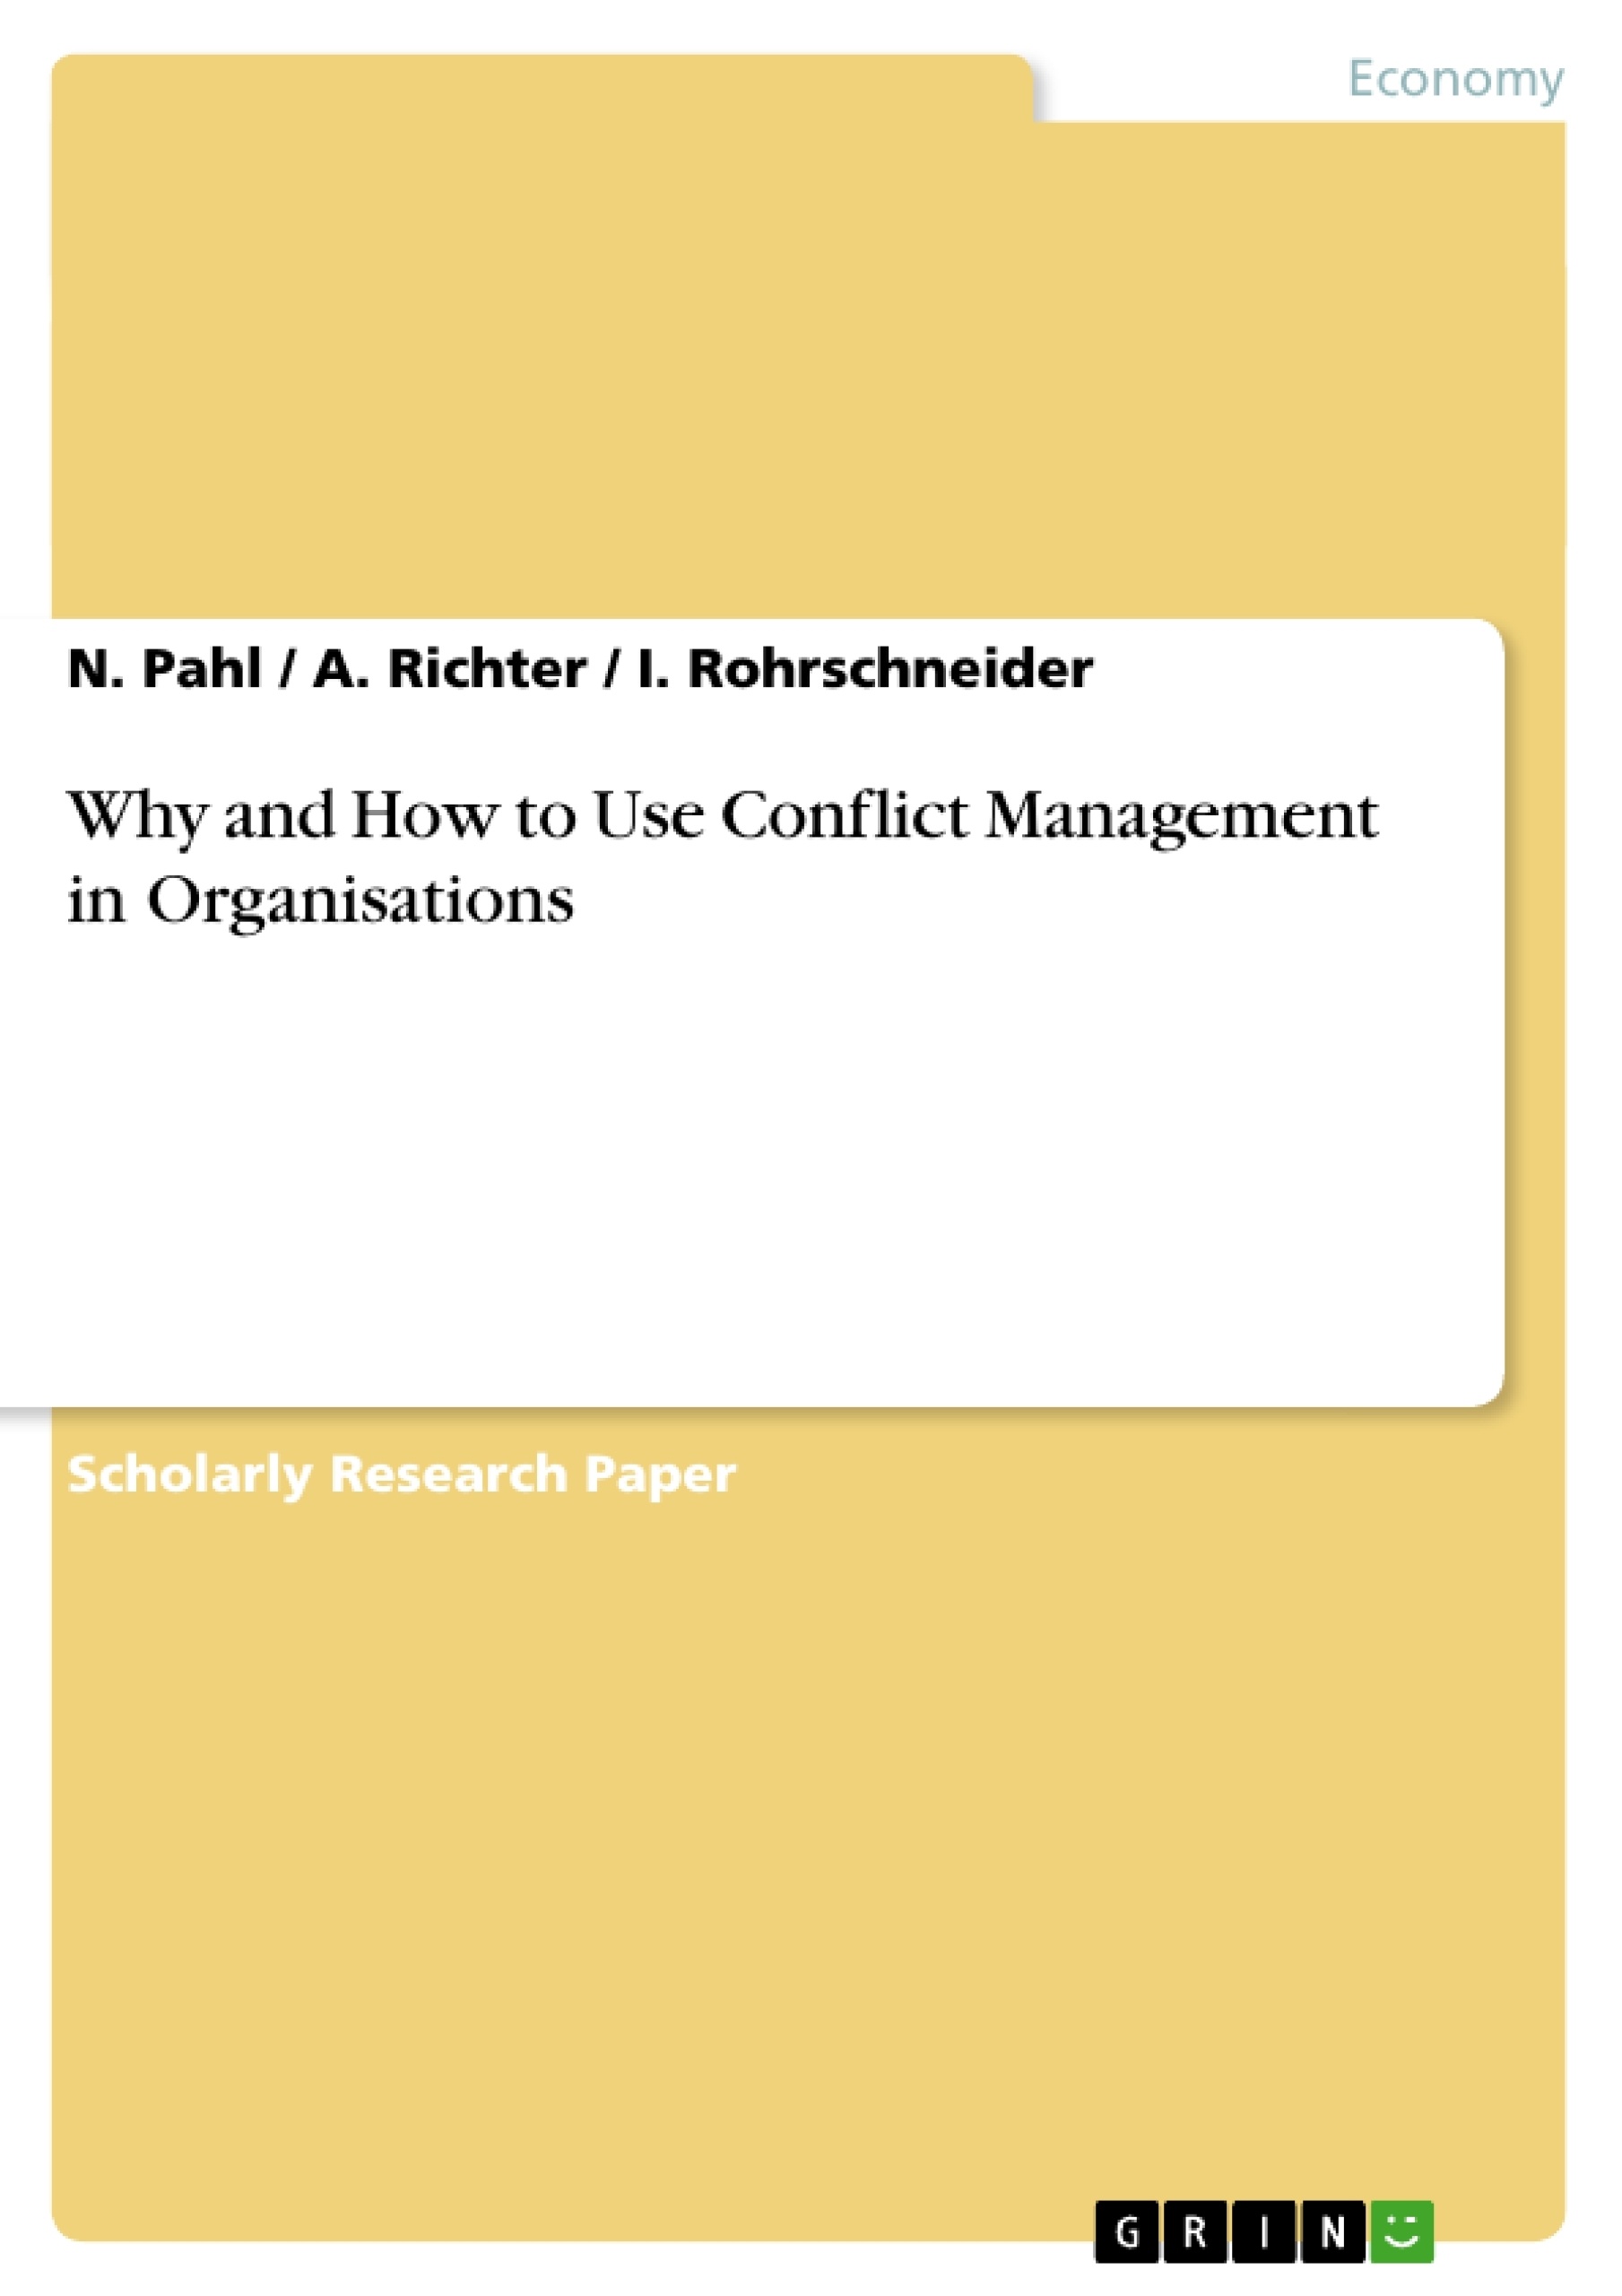 Title: Why and How to Use Conflict Management in Organisations